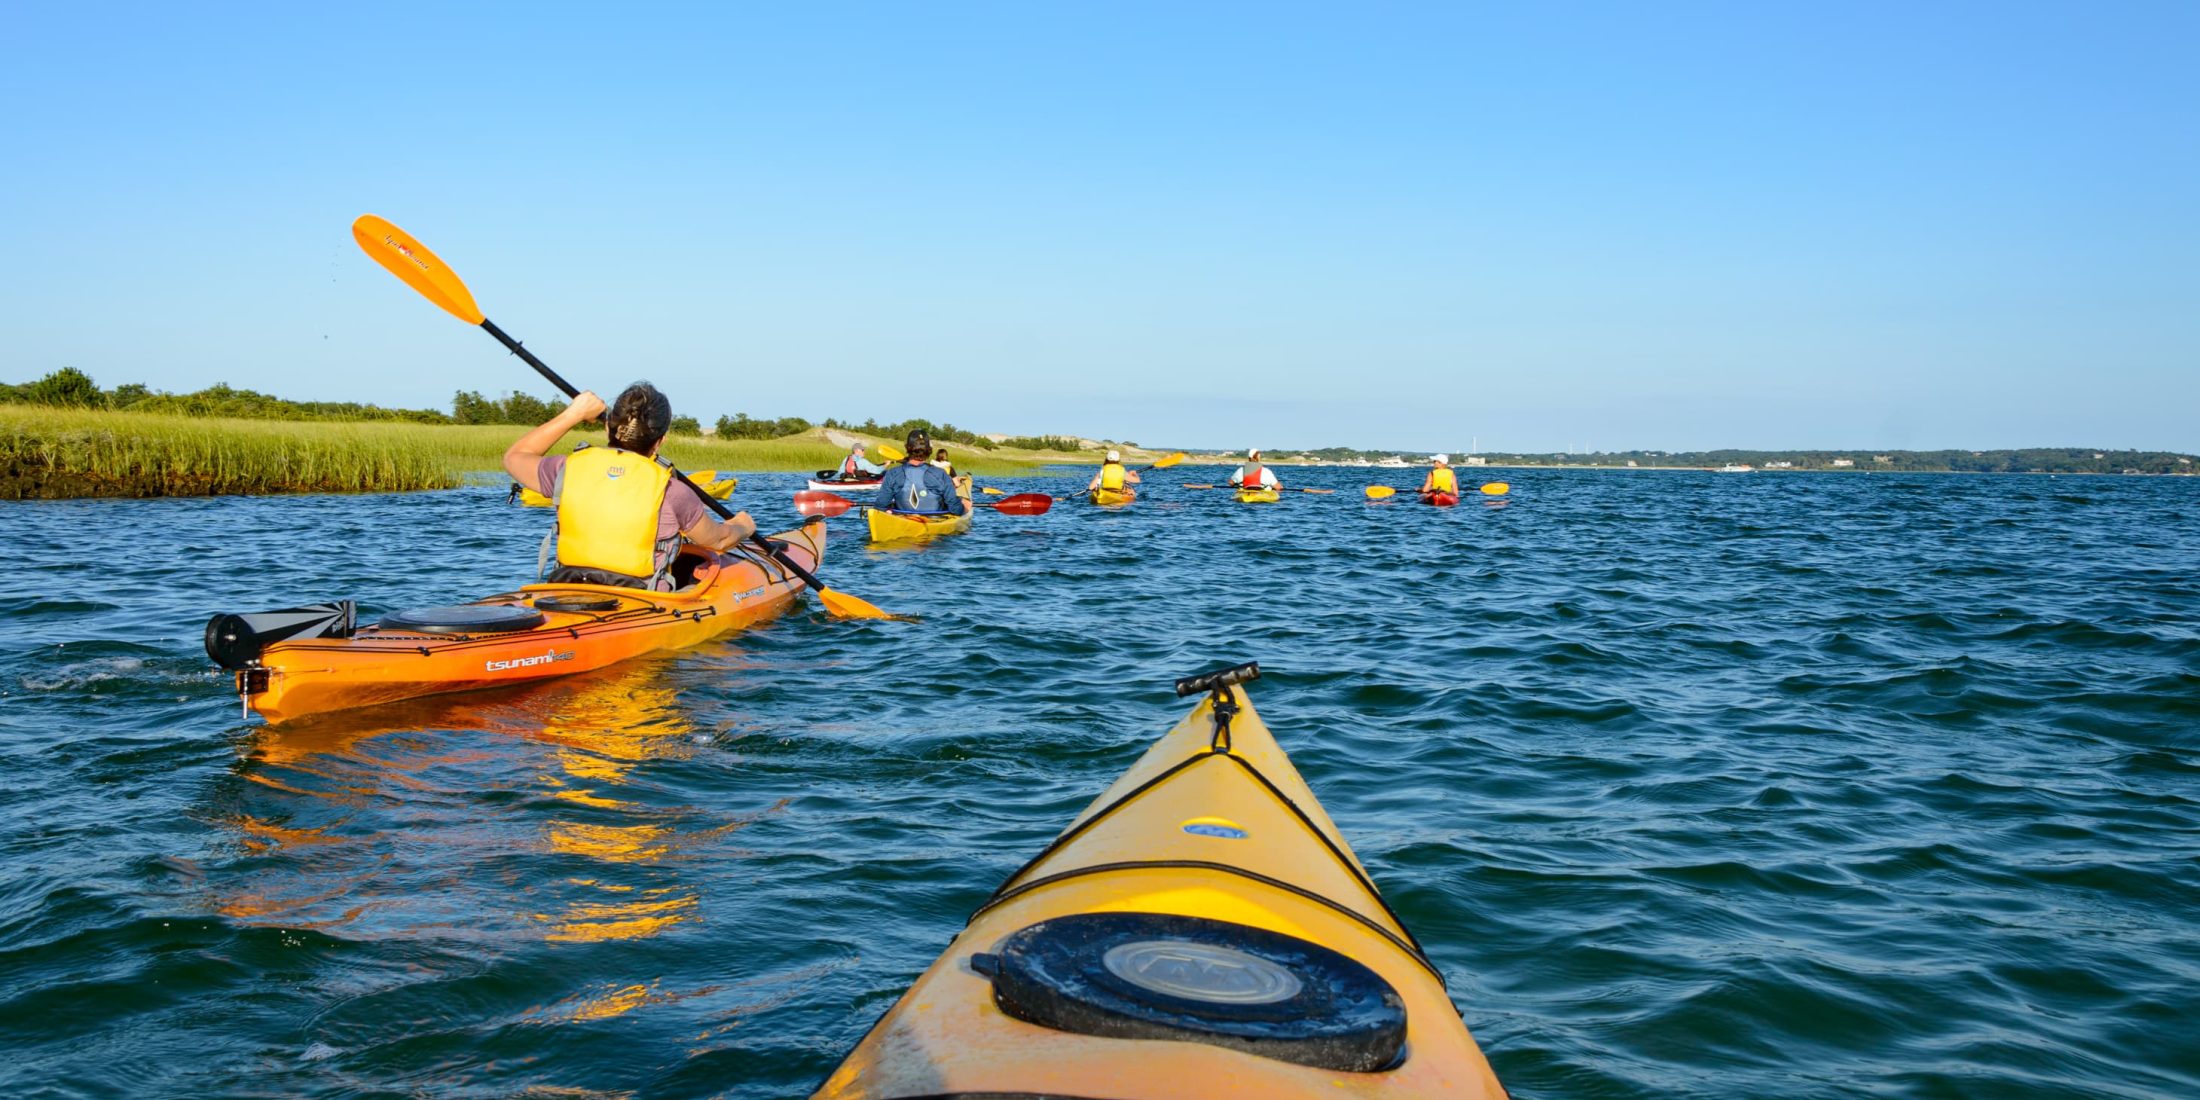 Group kayaking on calm waters